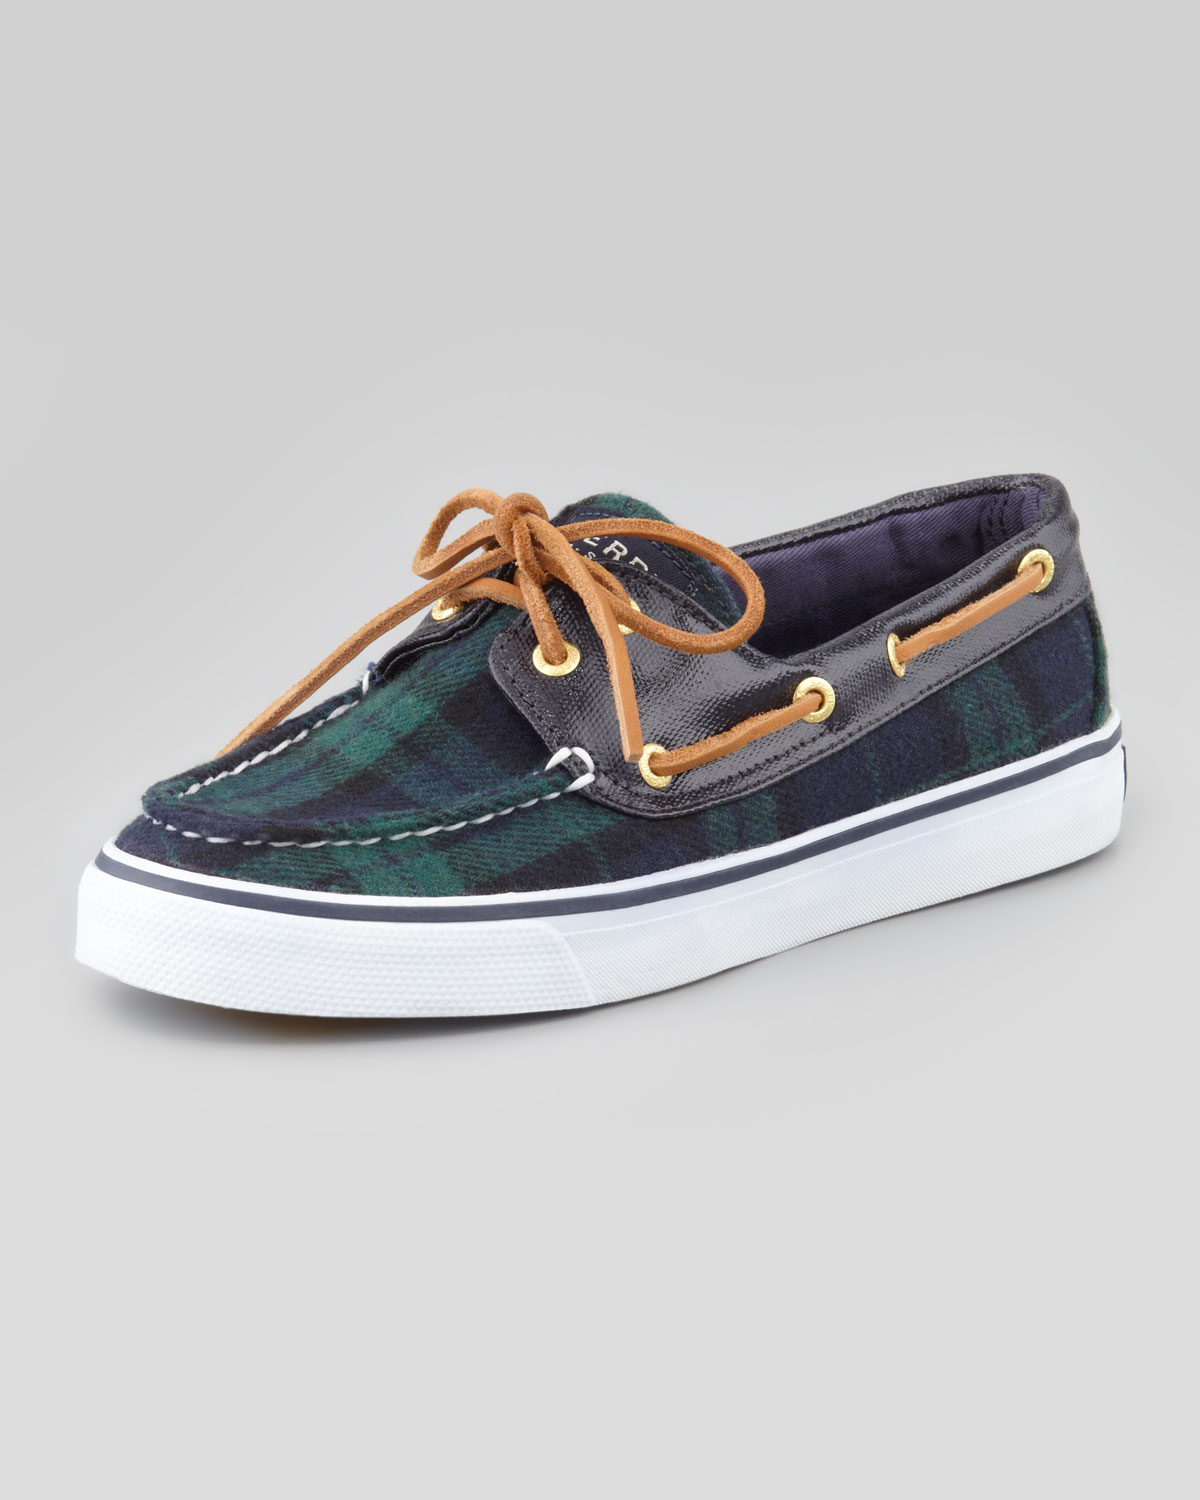 Sperry Top-Sider Plaid Bahama Boat Shoe 